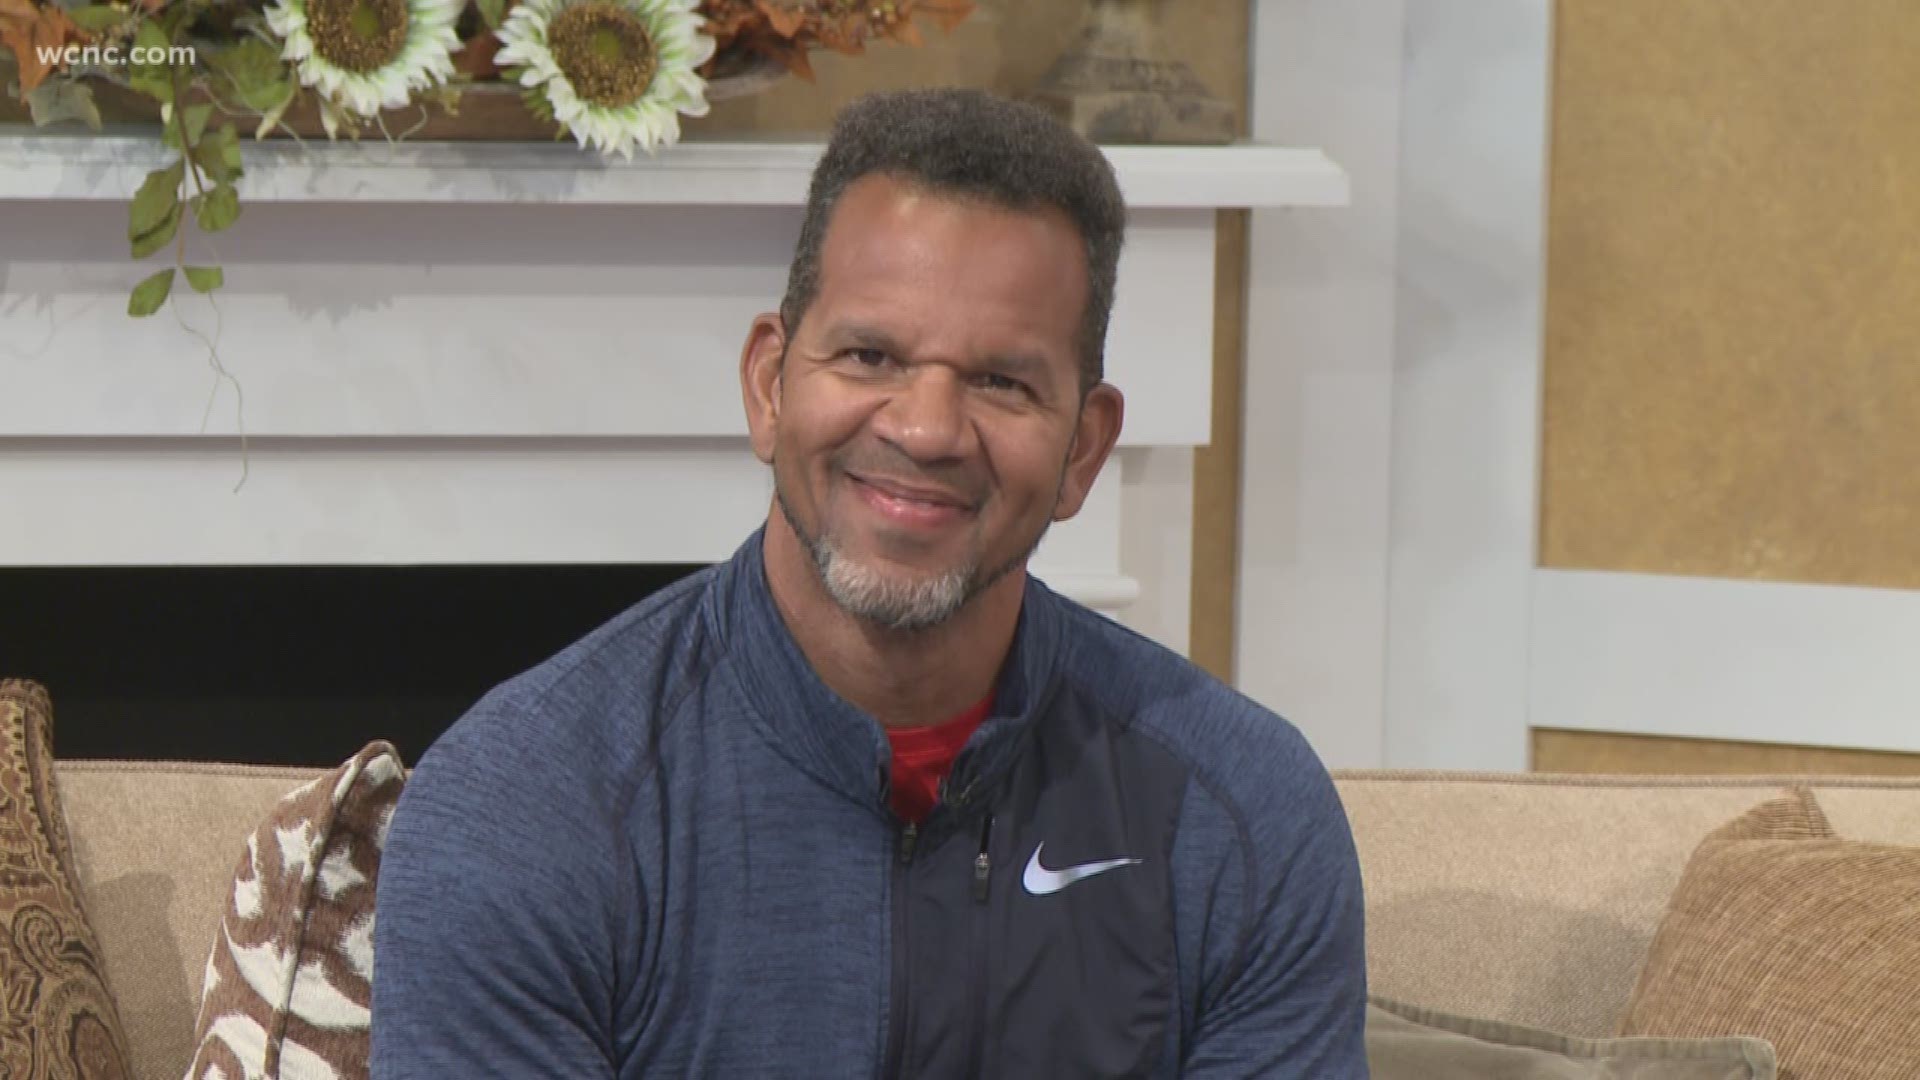 Andre Reed tells us how the Boys and Girls Club helped him become the man he is today.